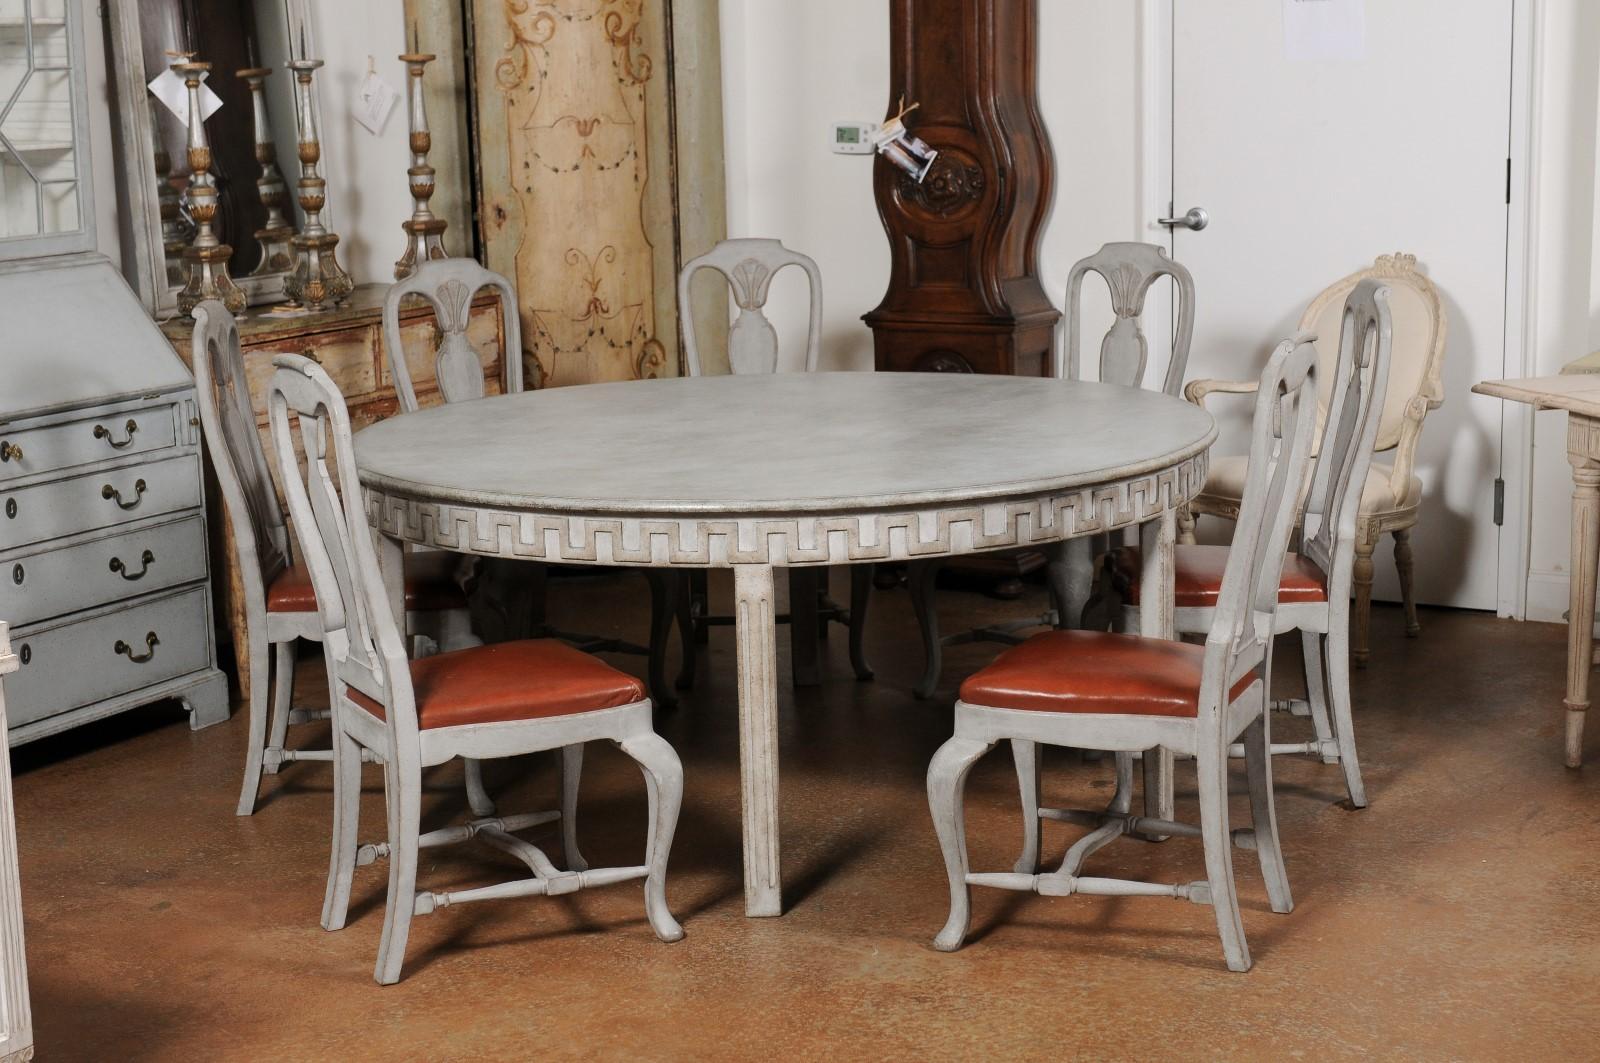 A Swedish Gustavian style painted wood dining table from the 20th century, with carved meander frieze and fluted legs. Created in Sweden during the 20th century, this painted table features a circular top sitting above an exquisite carved meander